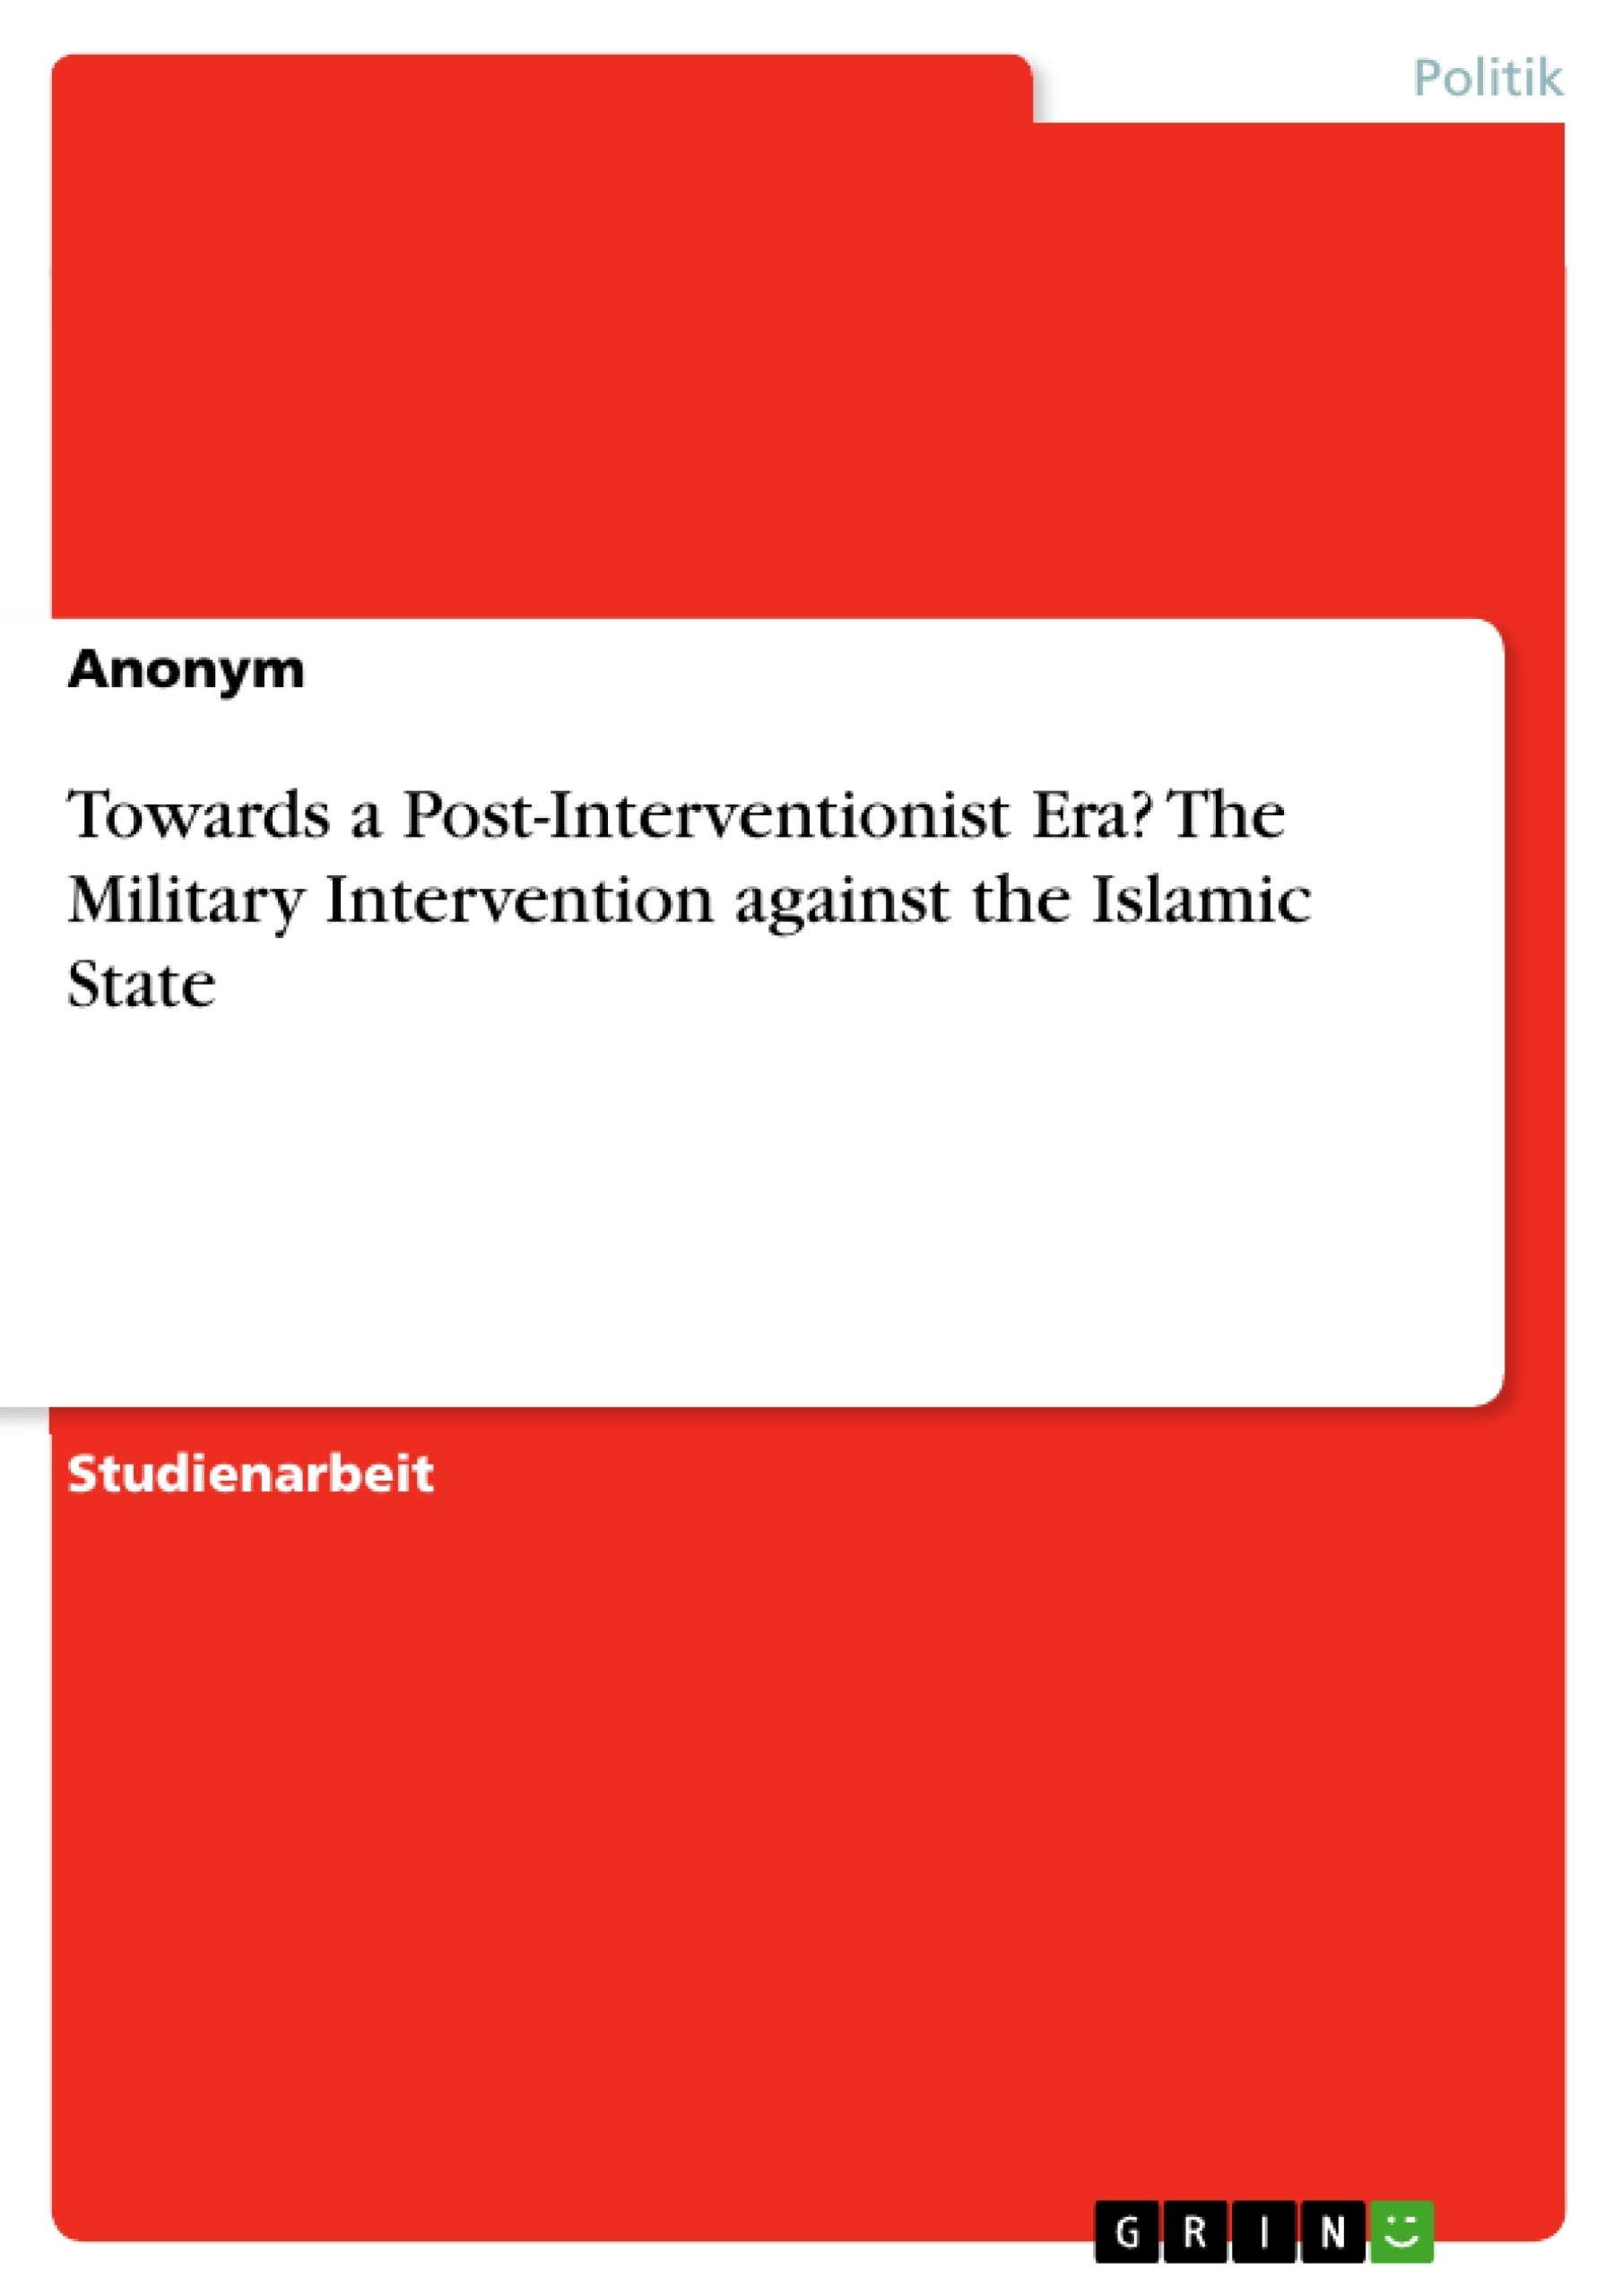 Titel: Towards a Post-Interventionist Era? The Military Intervention against the Islamic State